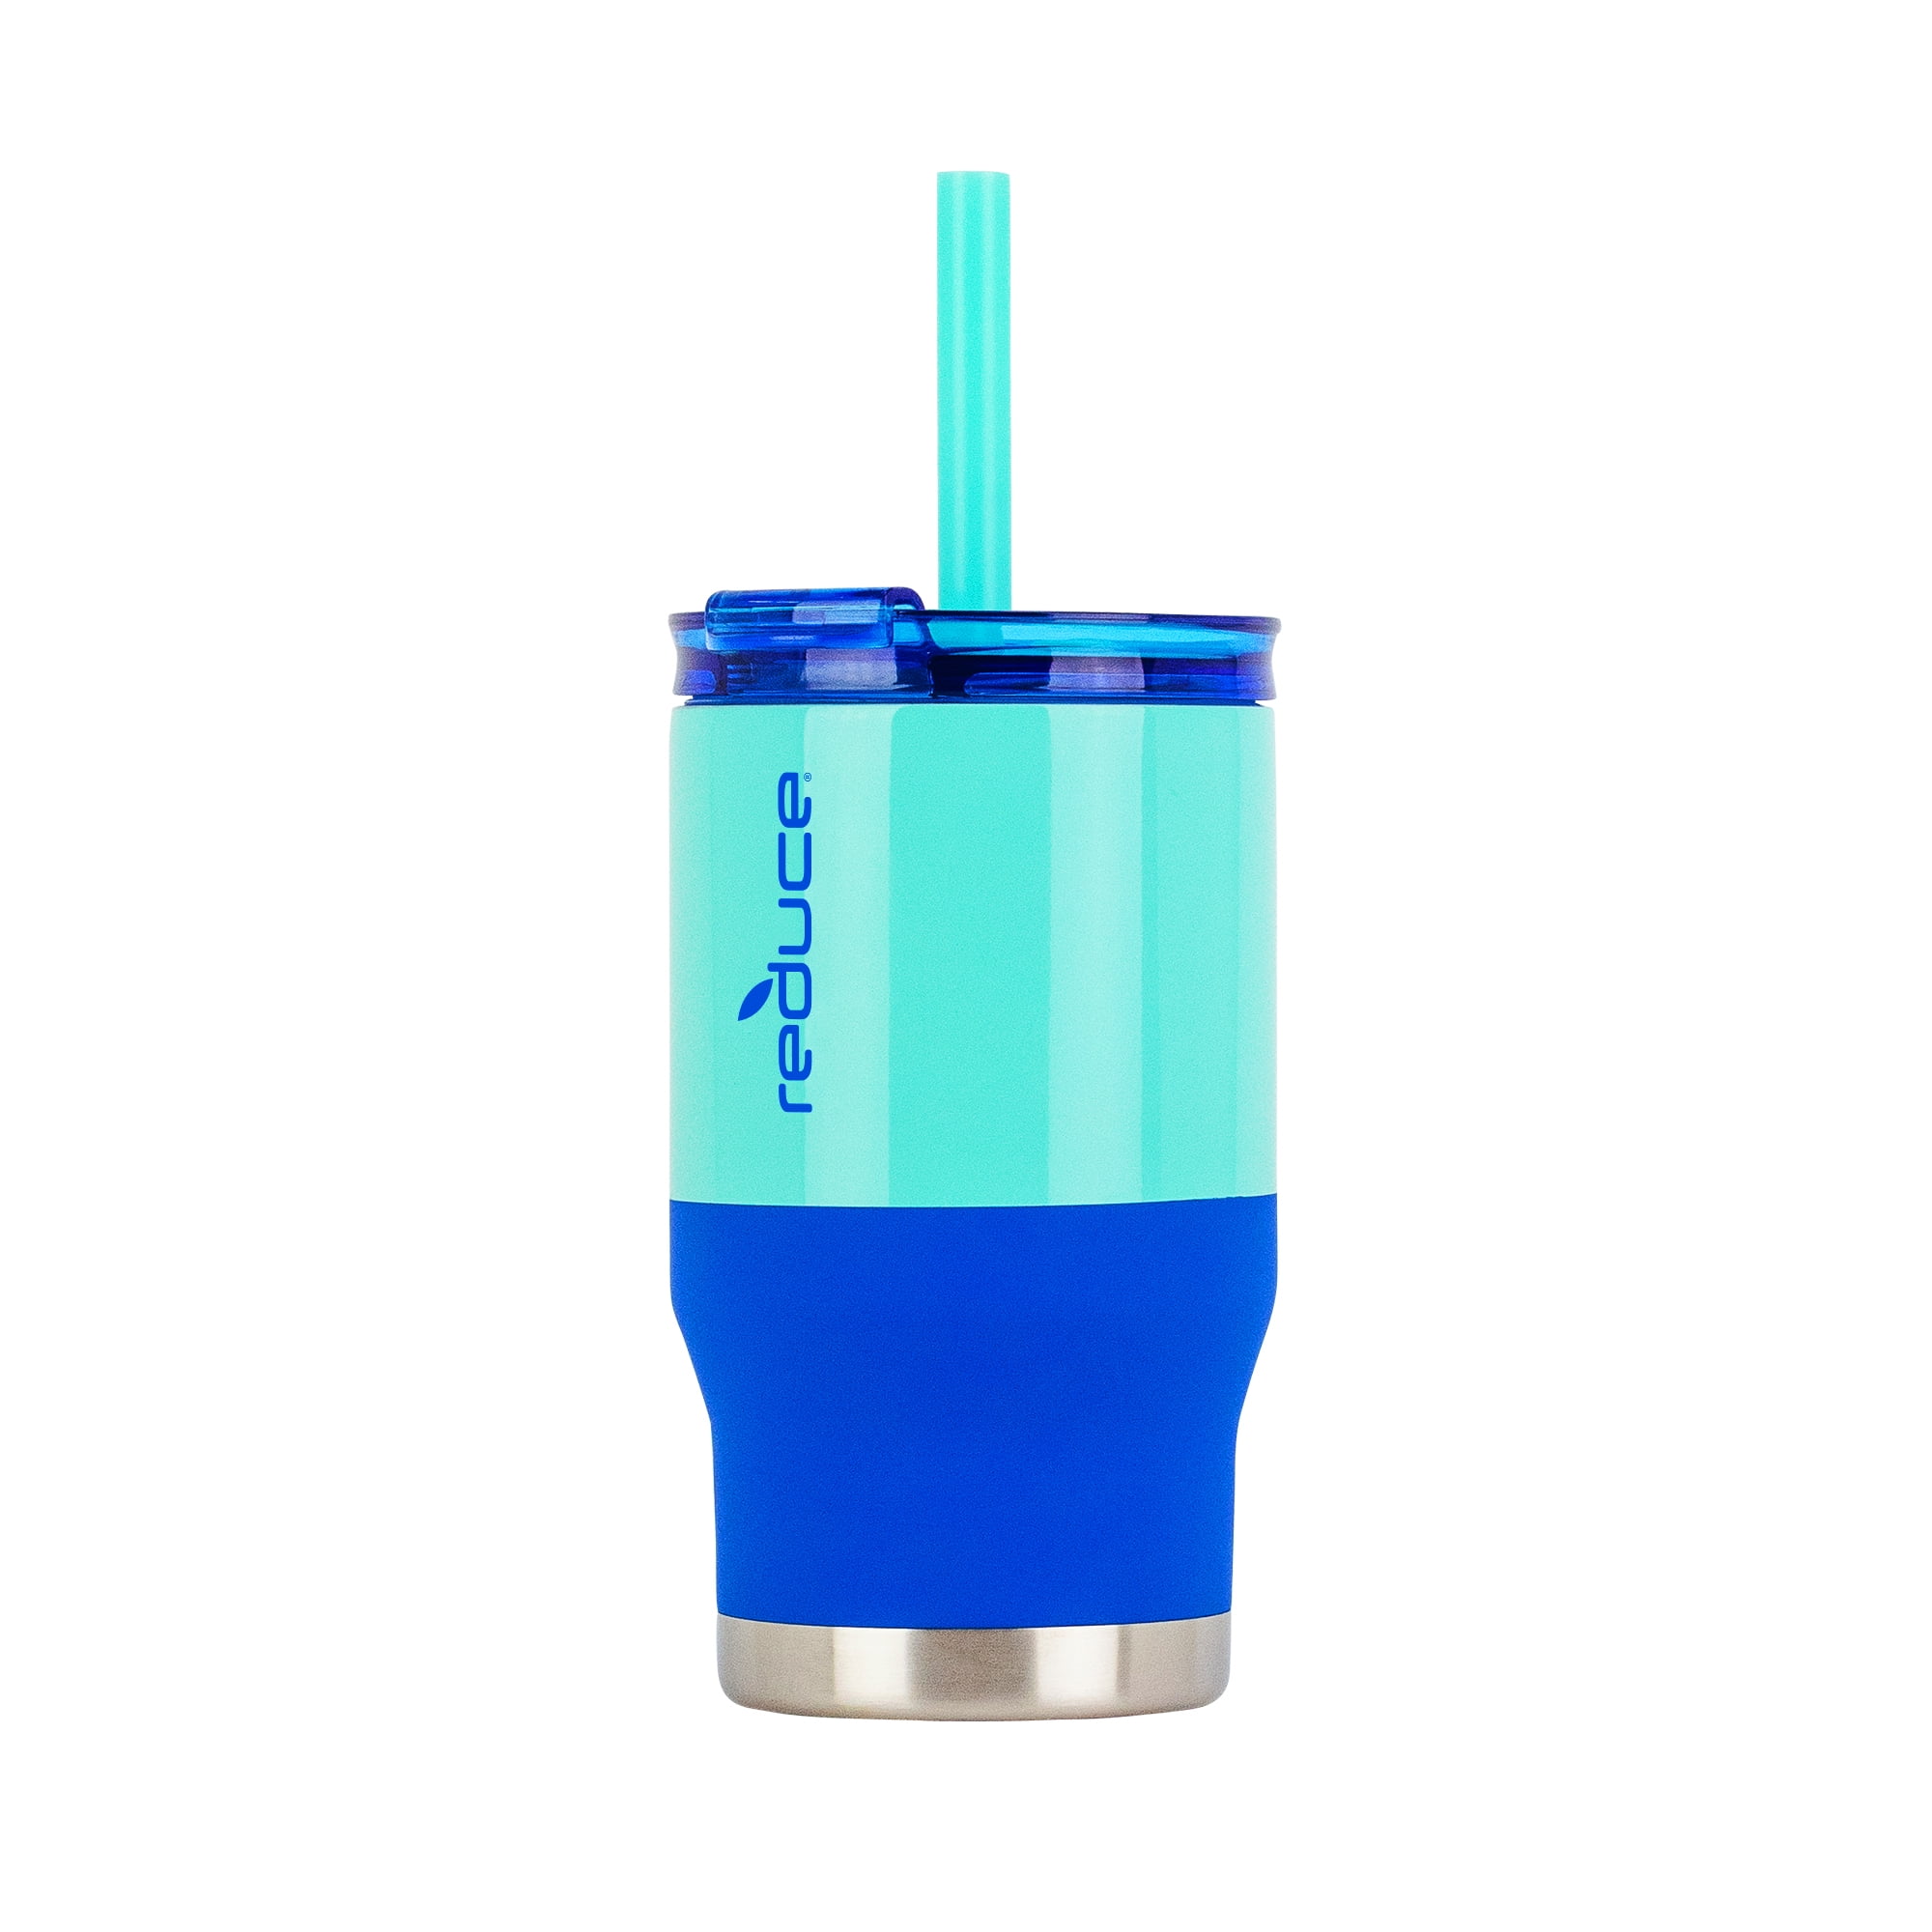 Reduce Coldee 14oz Tumblers with Handles, 2-pack